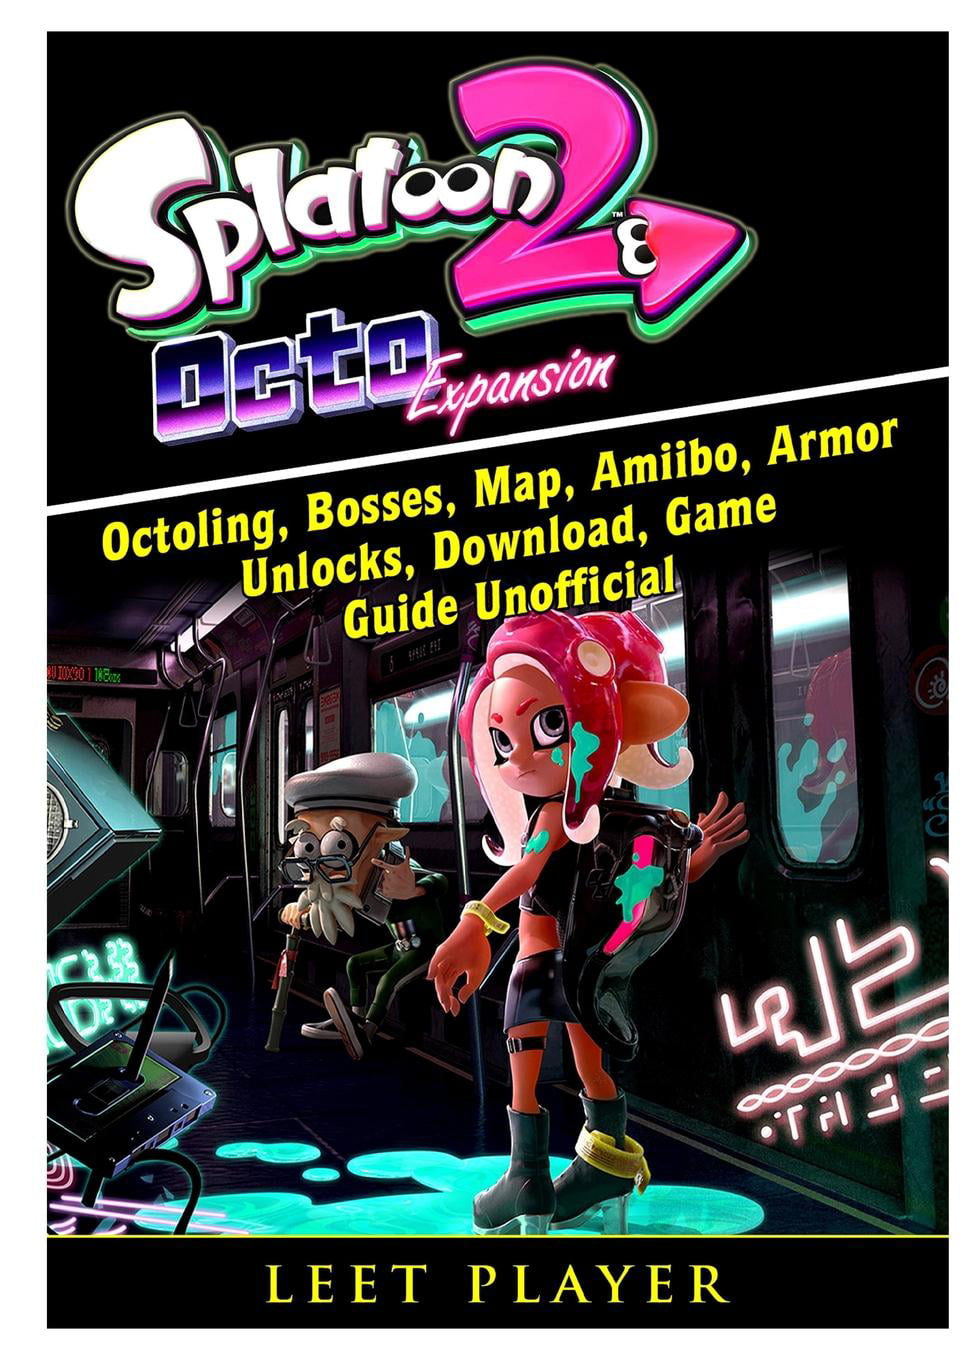 Splatoon 2 Octo Expansion, Octoling, Bosses, Map, Amiibo, Armor, Unlocks, Download, Game Guide Unofficial (Paperback) -